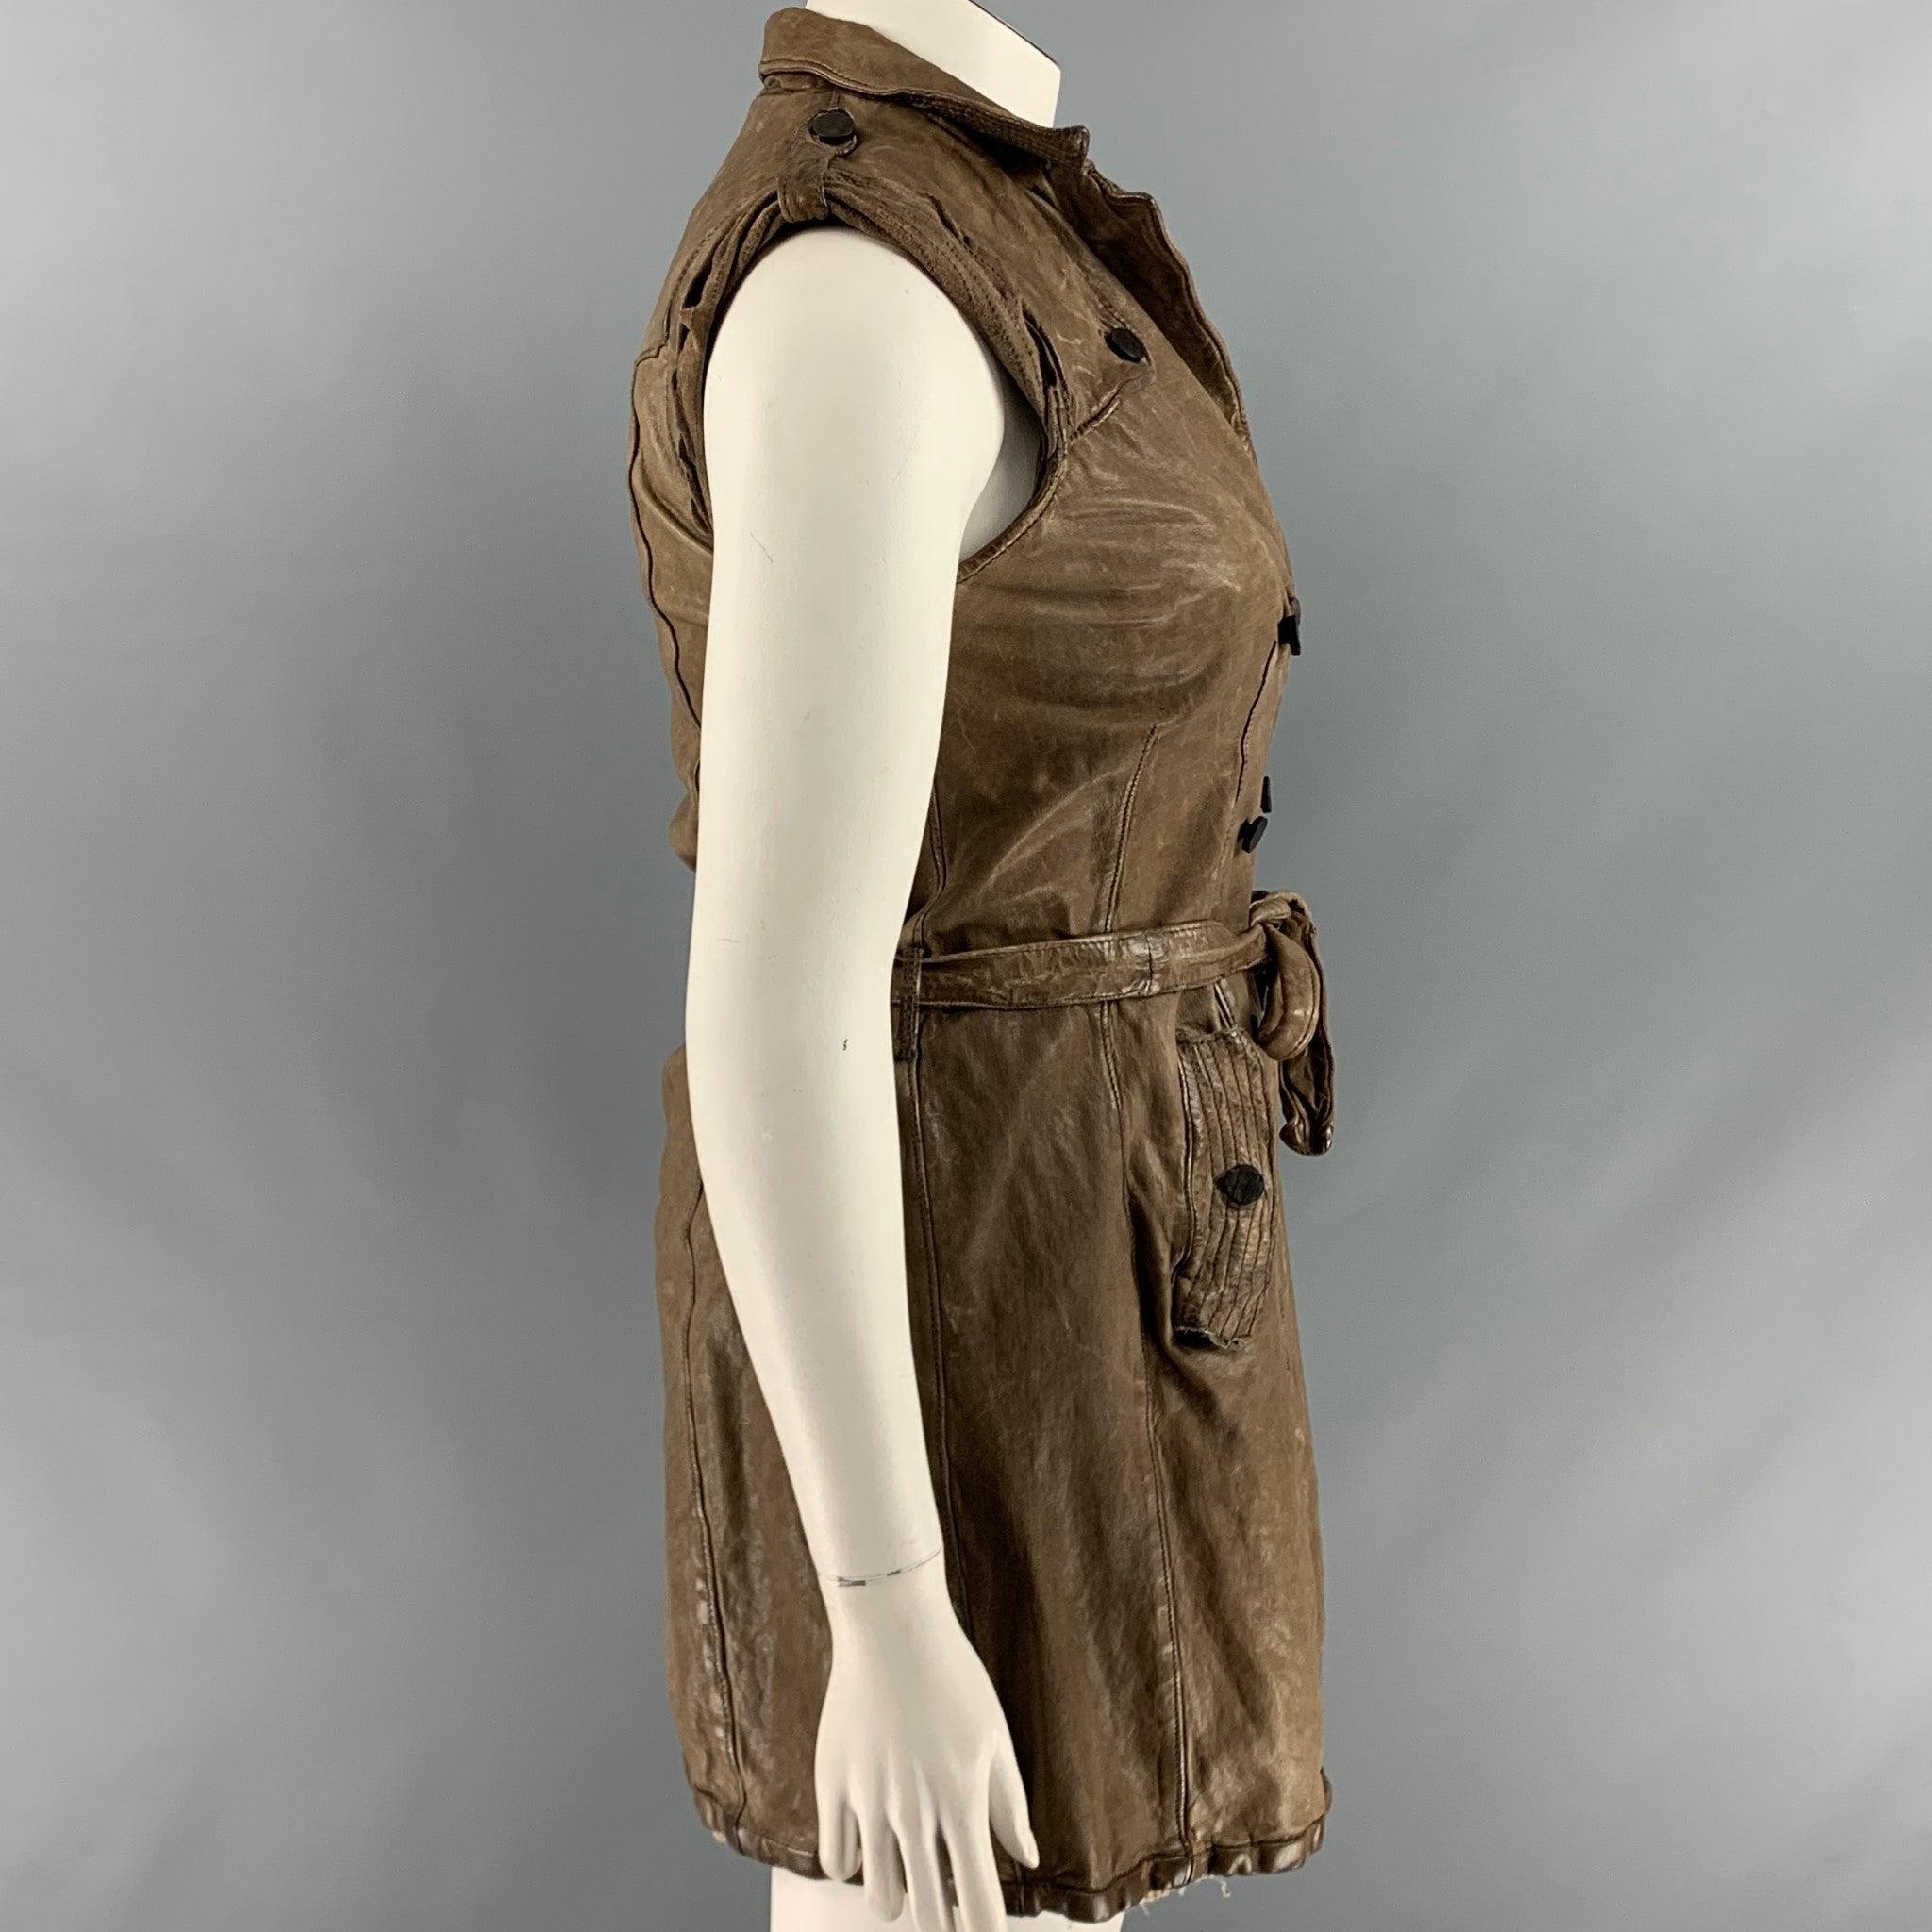 GIORGIO BRATO vest
in a brown and taupe leather fabric featuring a double breasted style, distressed details, belt tie, and a button closure. Made in Italy.Very Good Pre-Owned Condition. Minor signs of wear. 

Marked:   46 

Measurements: 
